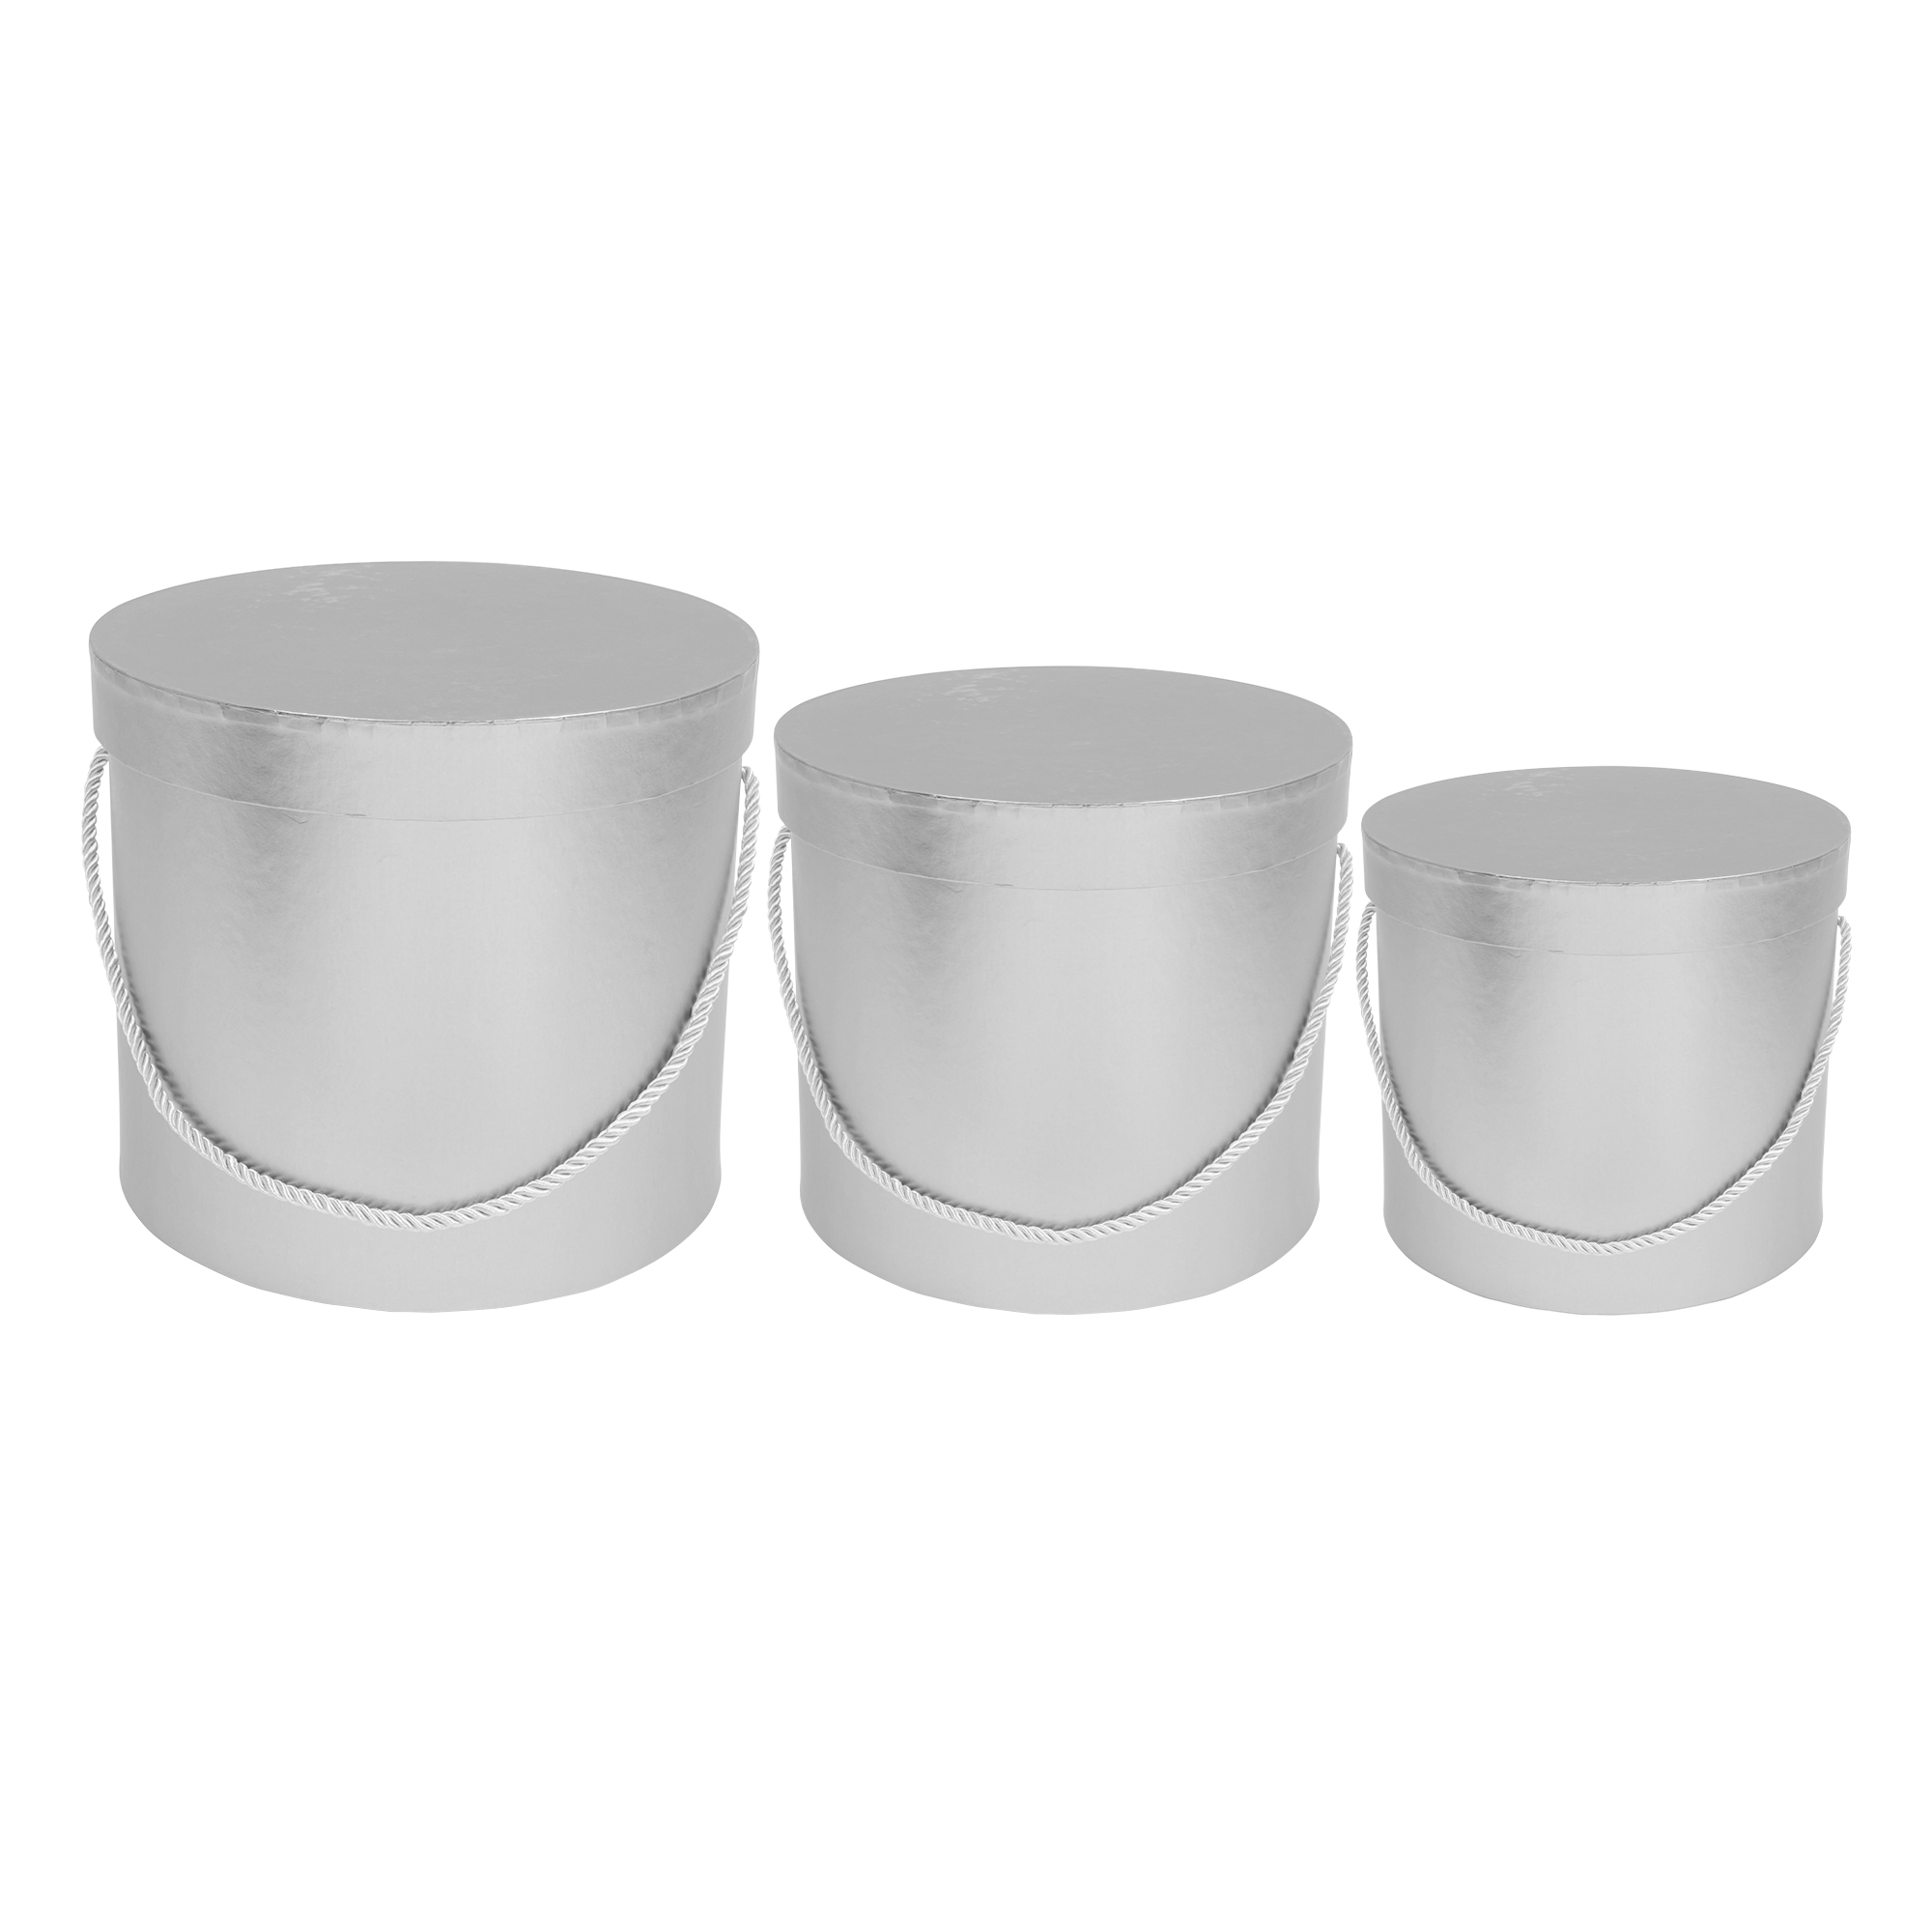 Nested Floral Boxes 3pc/set - Silver